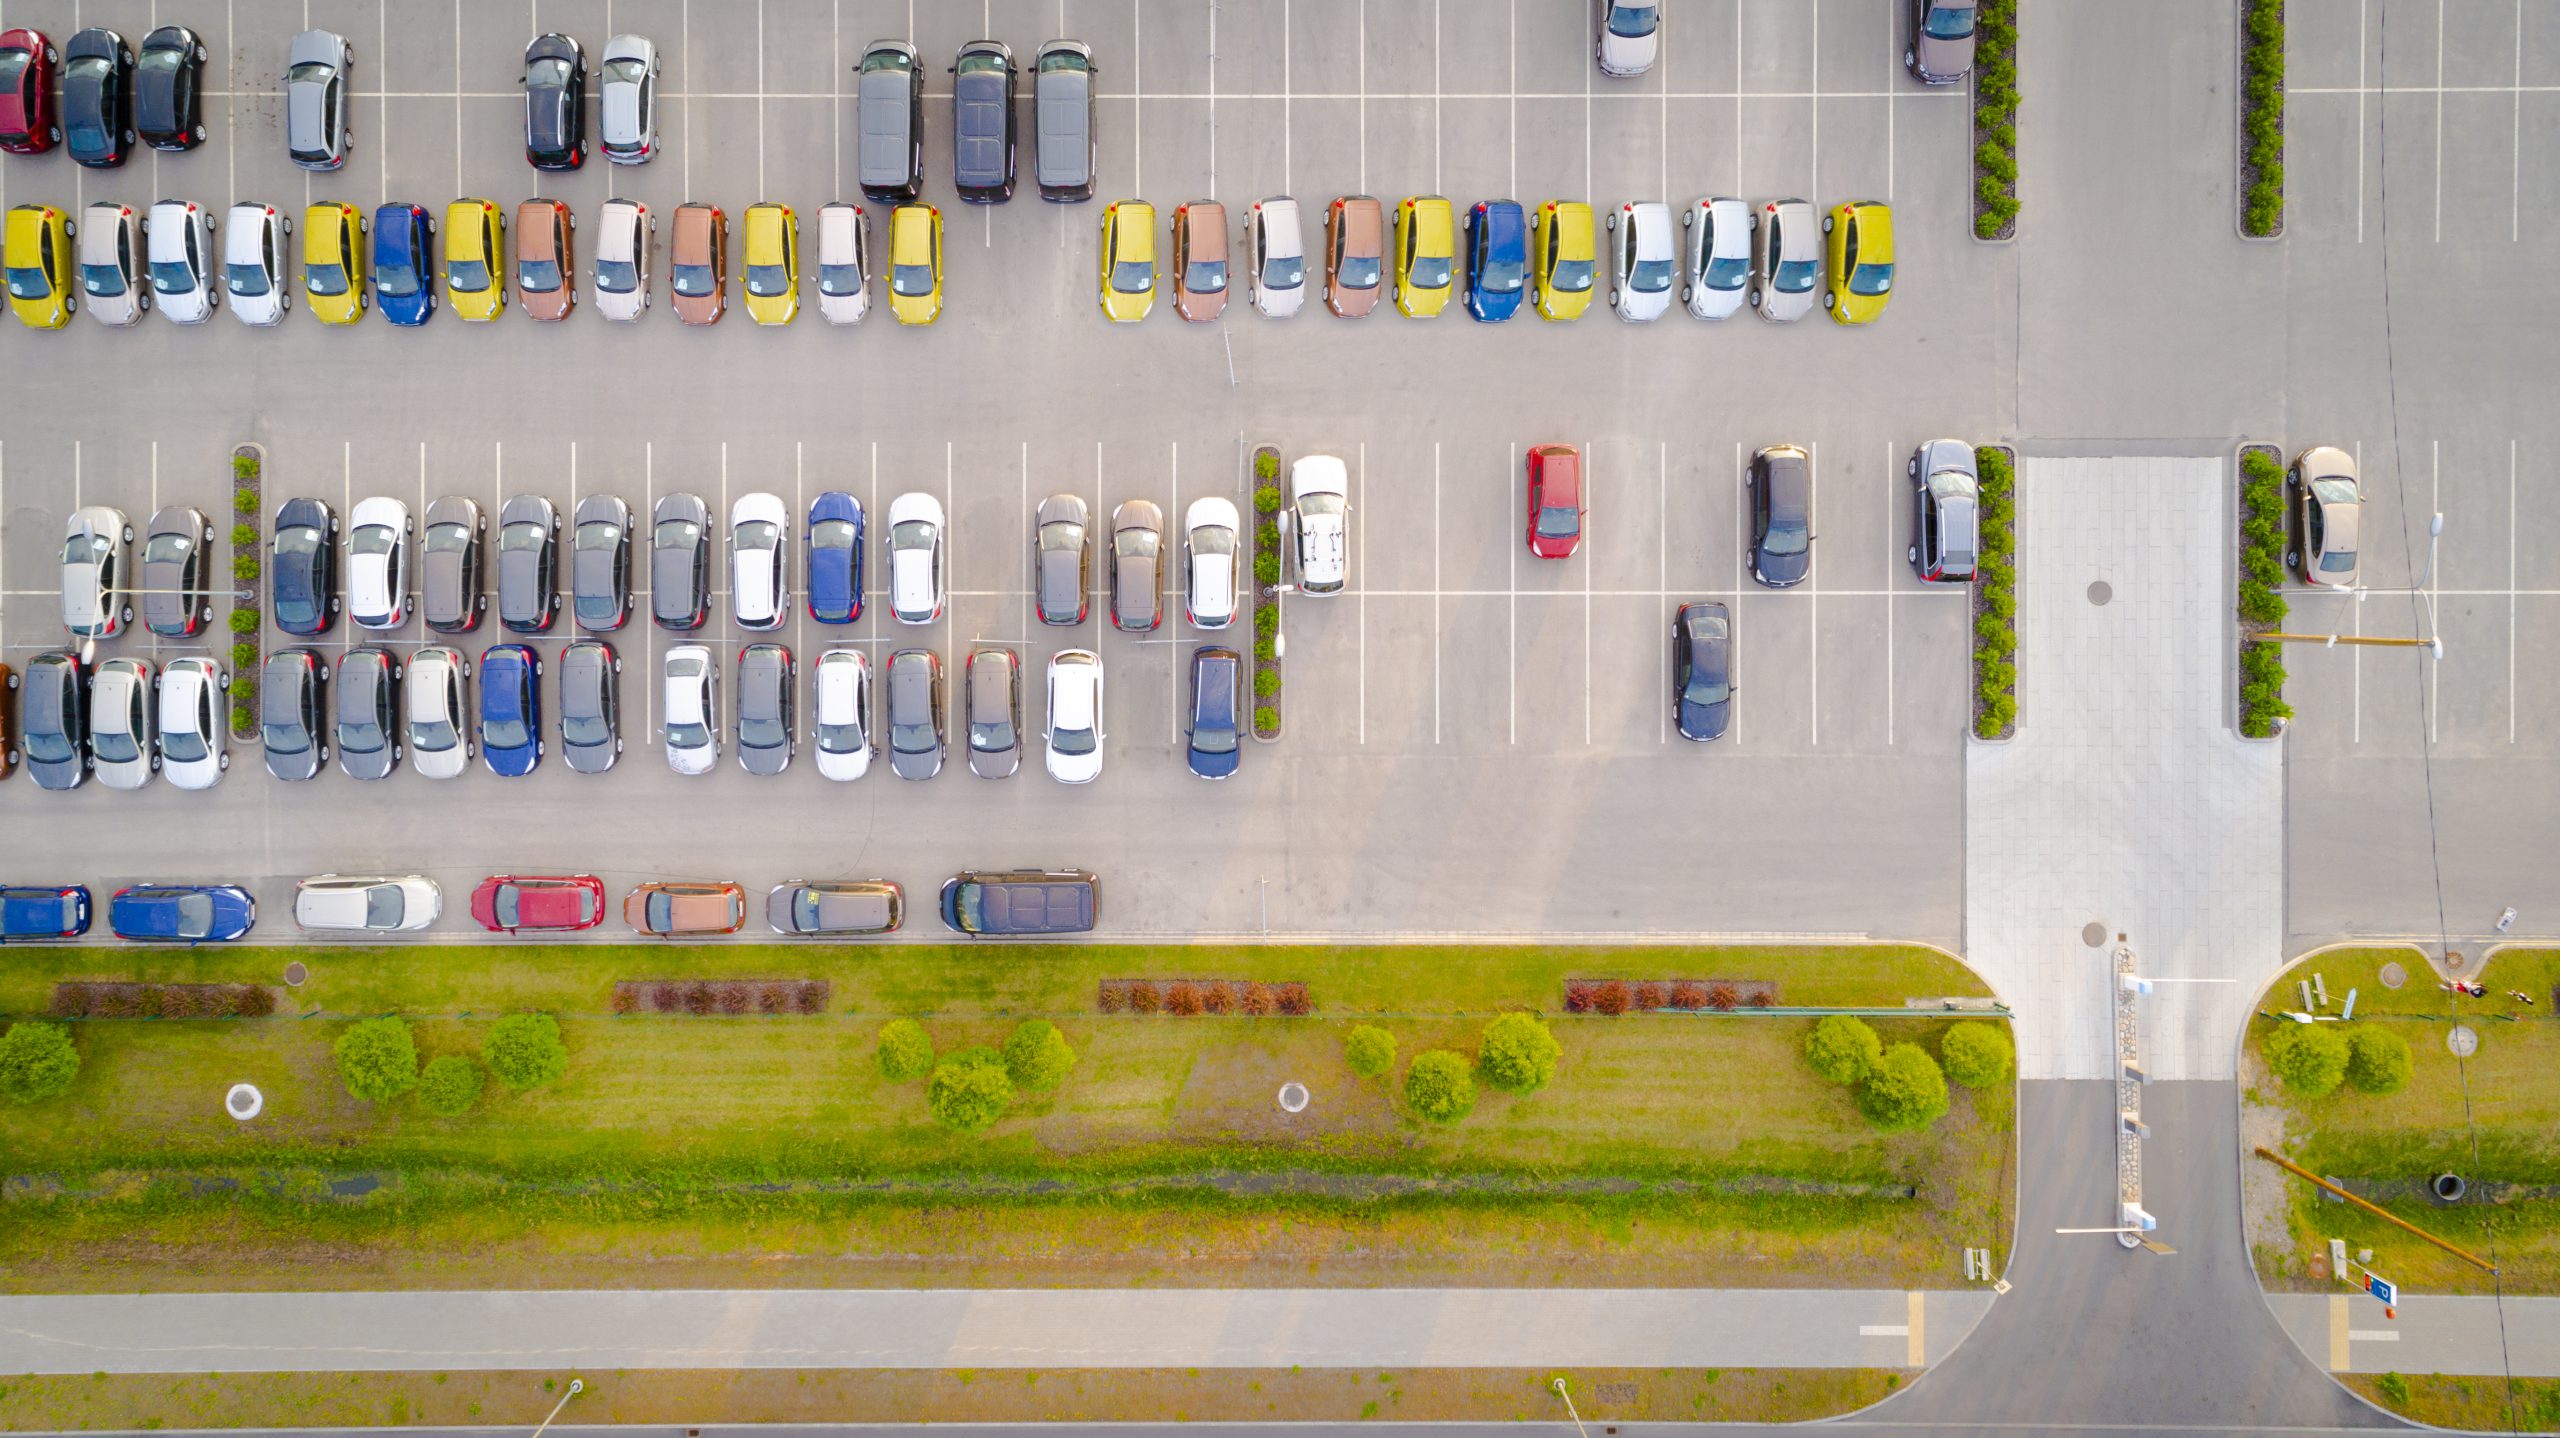 car-parking-lot-viewed-from-above-aerial-view-top-2021-09-01-23-18-04-utc